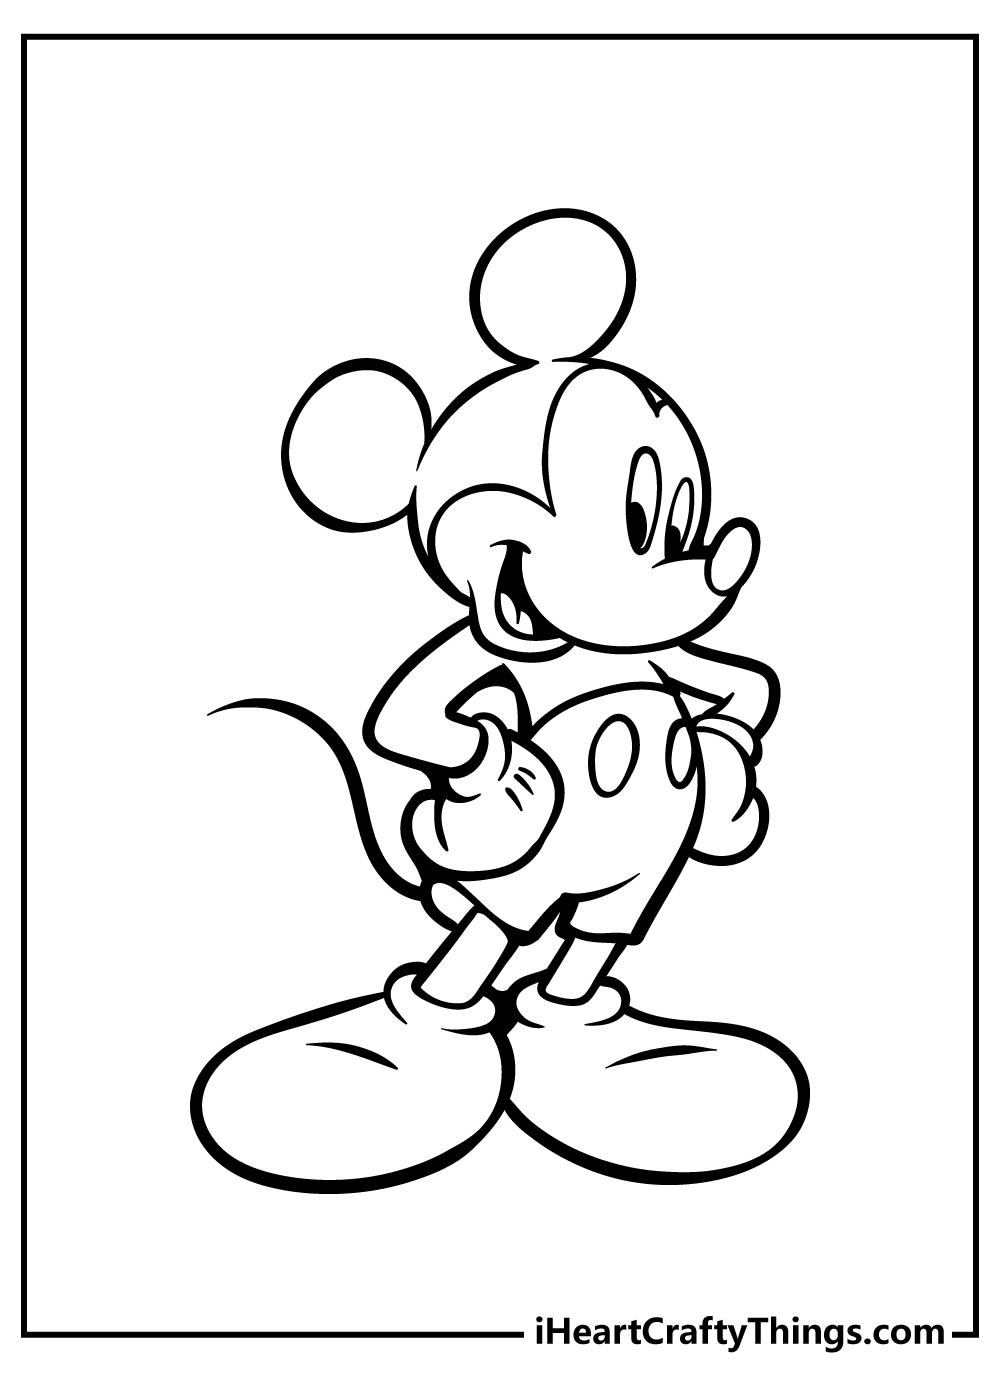 Mickey Mouse Coloring Pages for preschoolers free printable